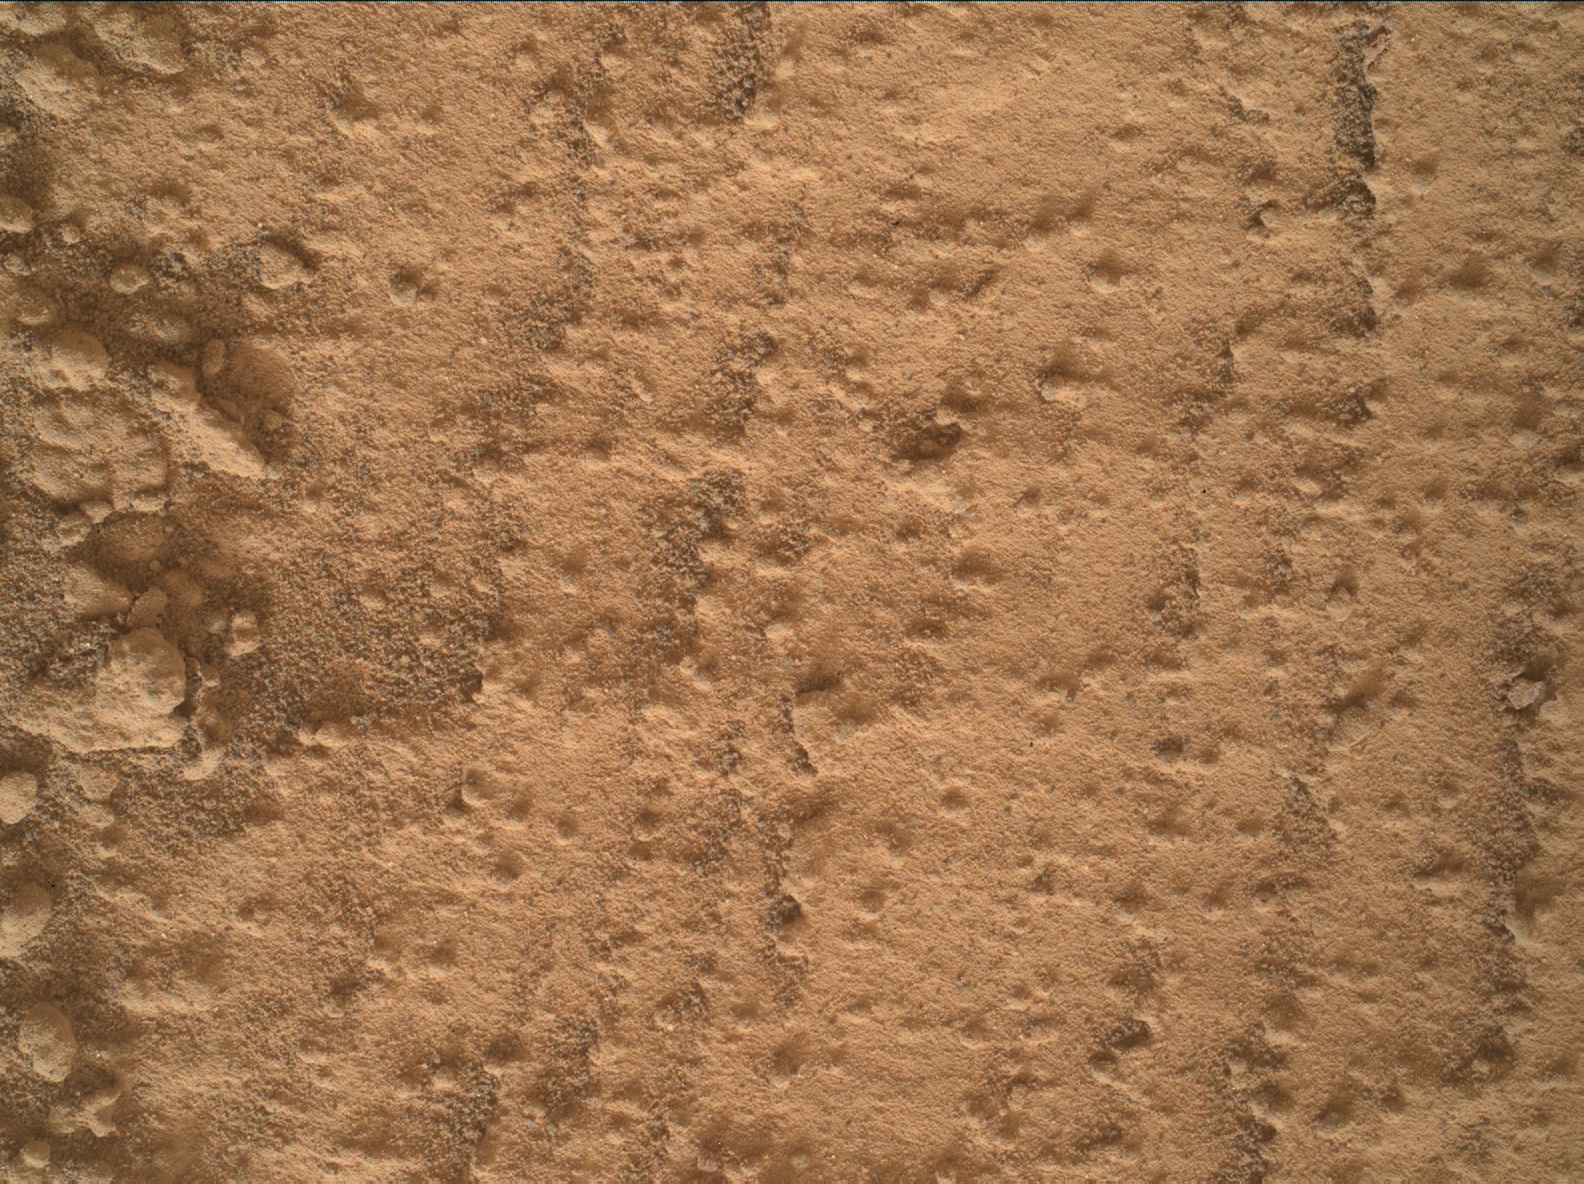 Nasa's Mars rover Curiosity acquired this image using its Mars Hand Lens Imager (MAHLI) on Sol 3473